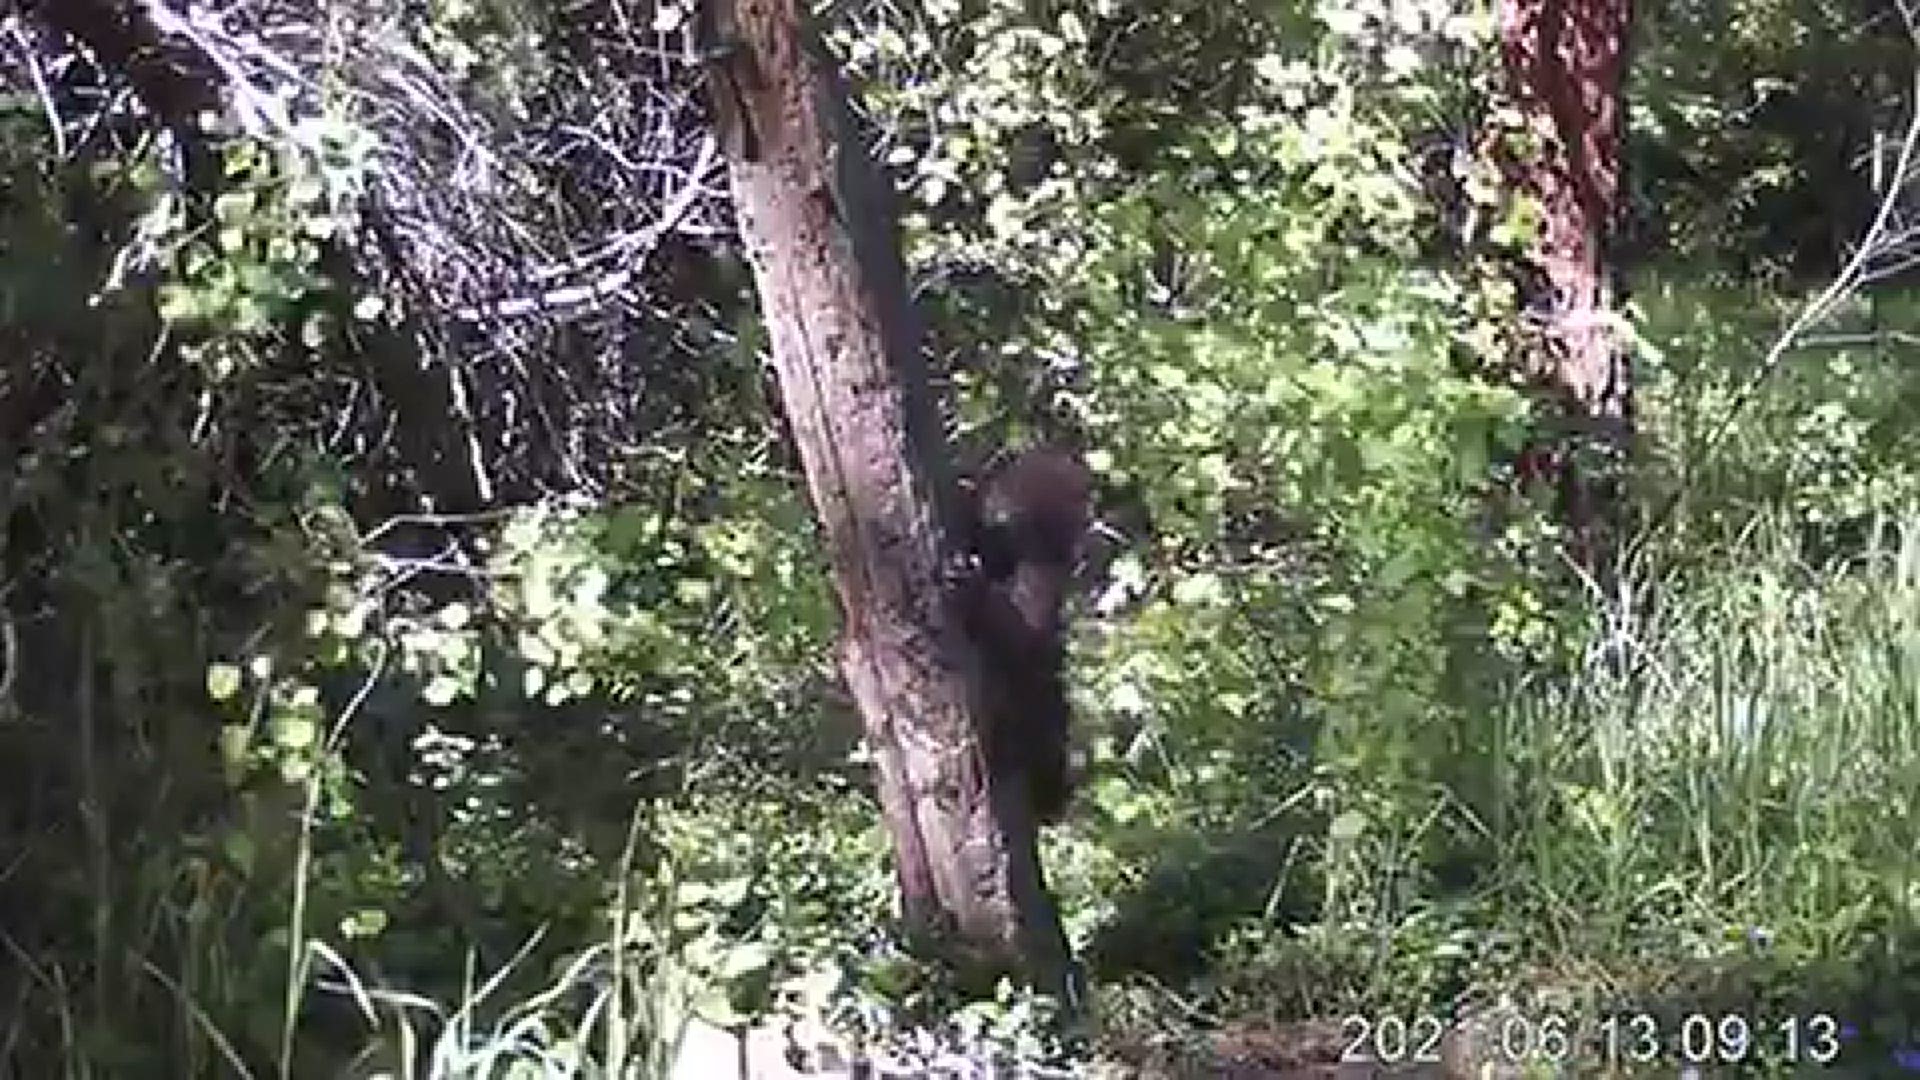 This black bear cub is practicing his scent marking technique. Black bears usually mark their scent on trees, also claw and bite at them during mating season.